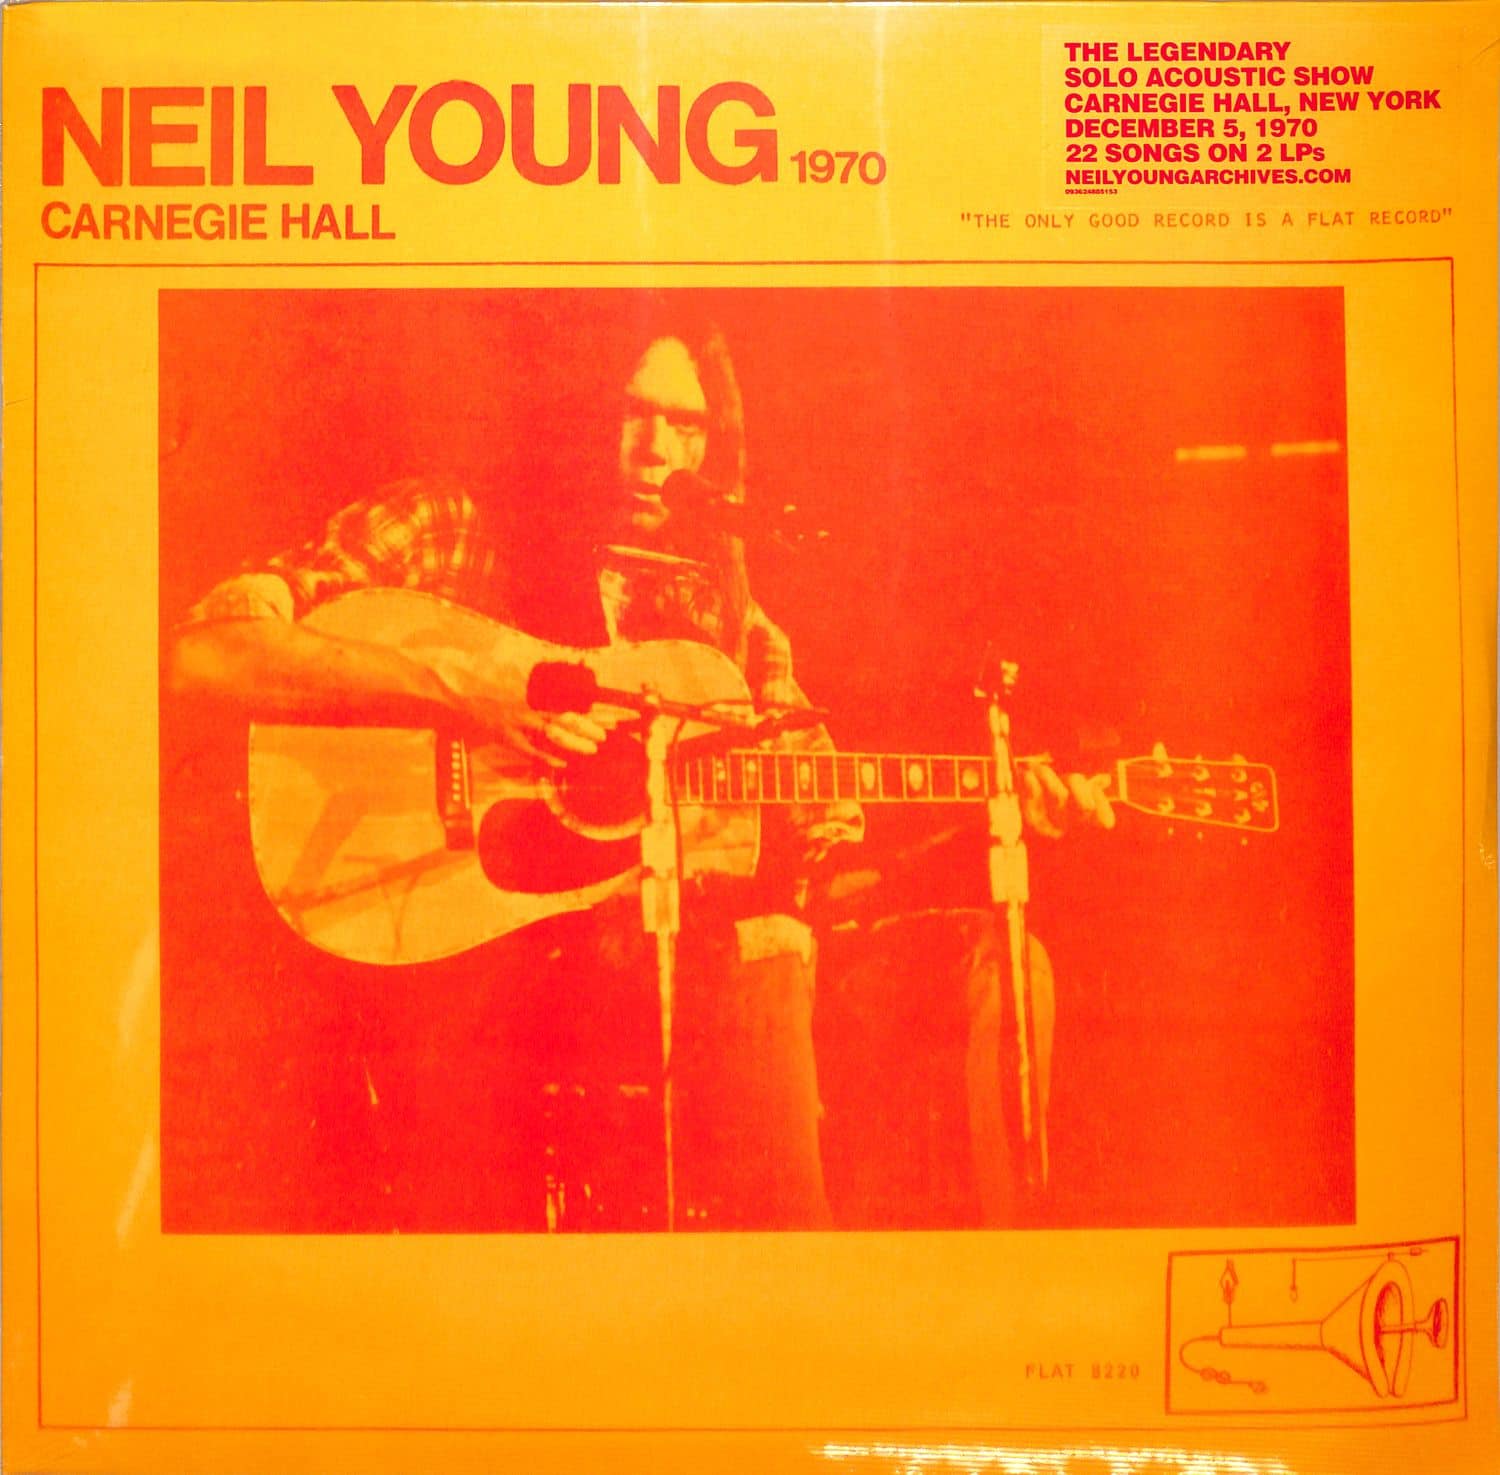 Neil Young - CARNEGIE HALL 1970 